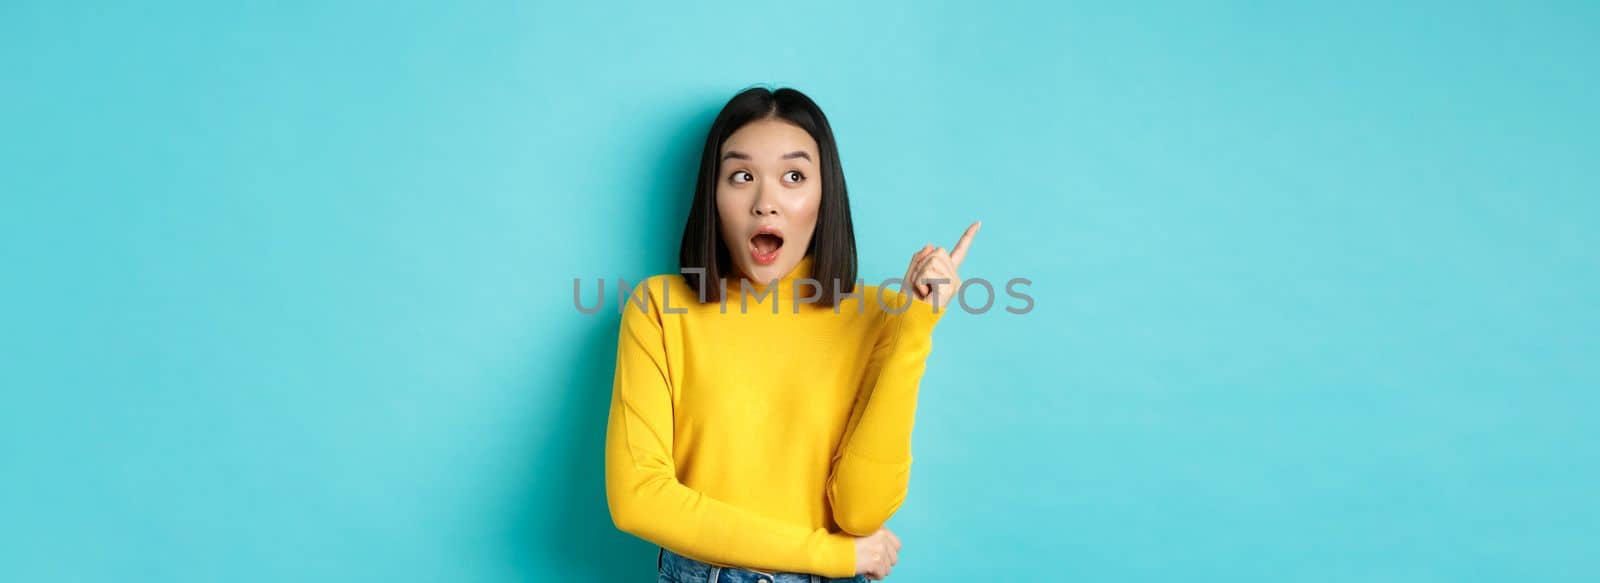 Shopping concept. Impressed asian girl in yellow pullover, pointing and looking left amazed, showing logo banner, standing over blue background.